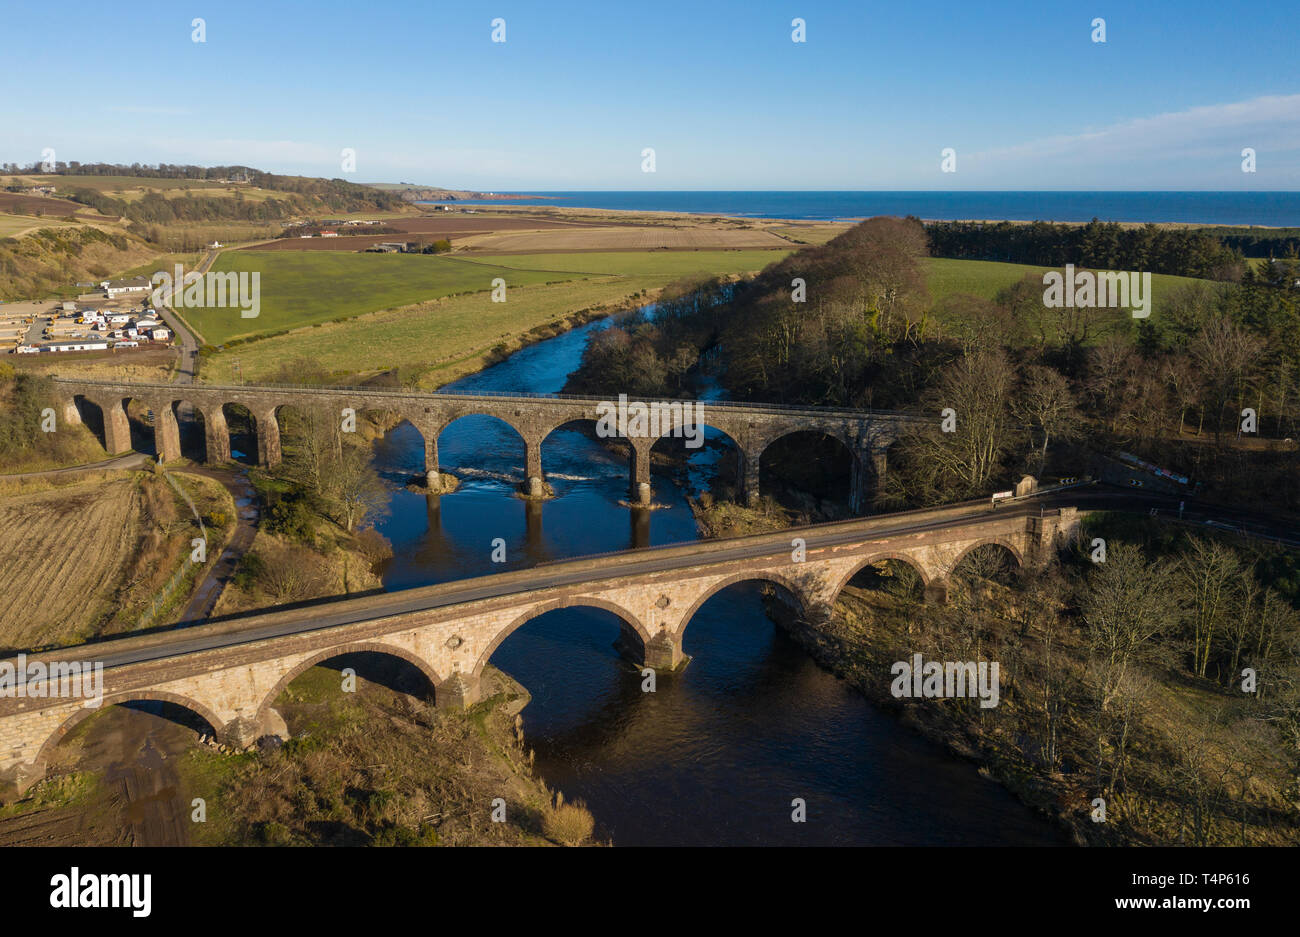 Aerial view of the Lower North Water bridge and the North Water Viaduct which cross the North Esk River as it flows in to the North Sea. On the left Stock Photo